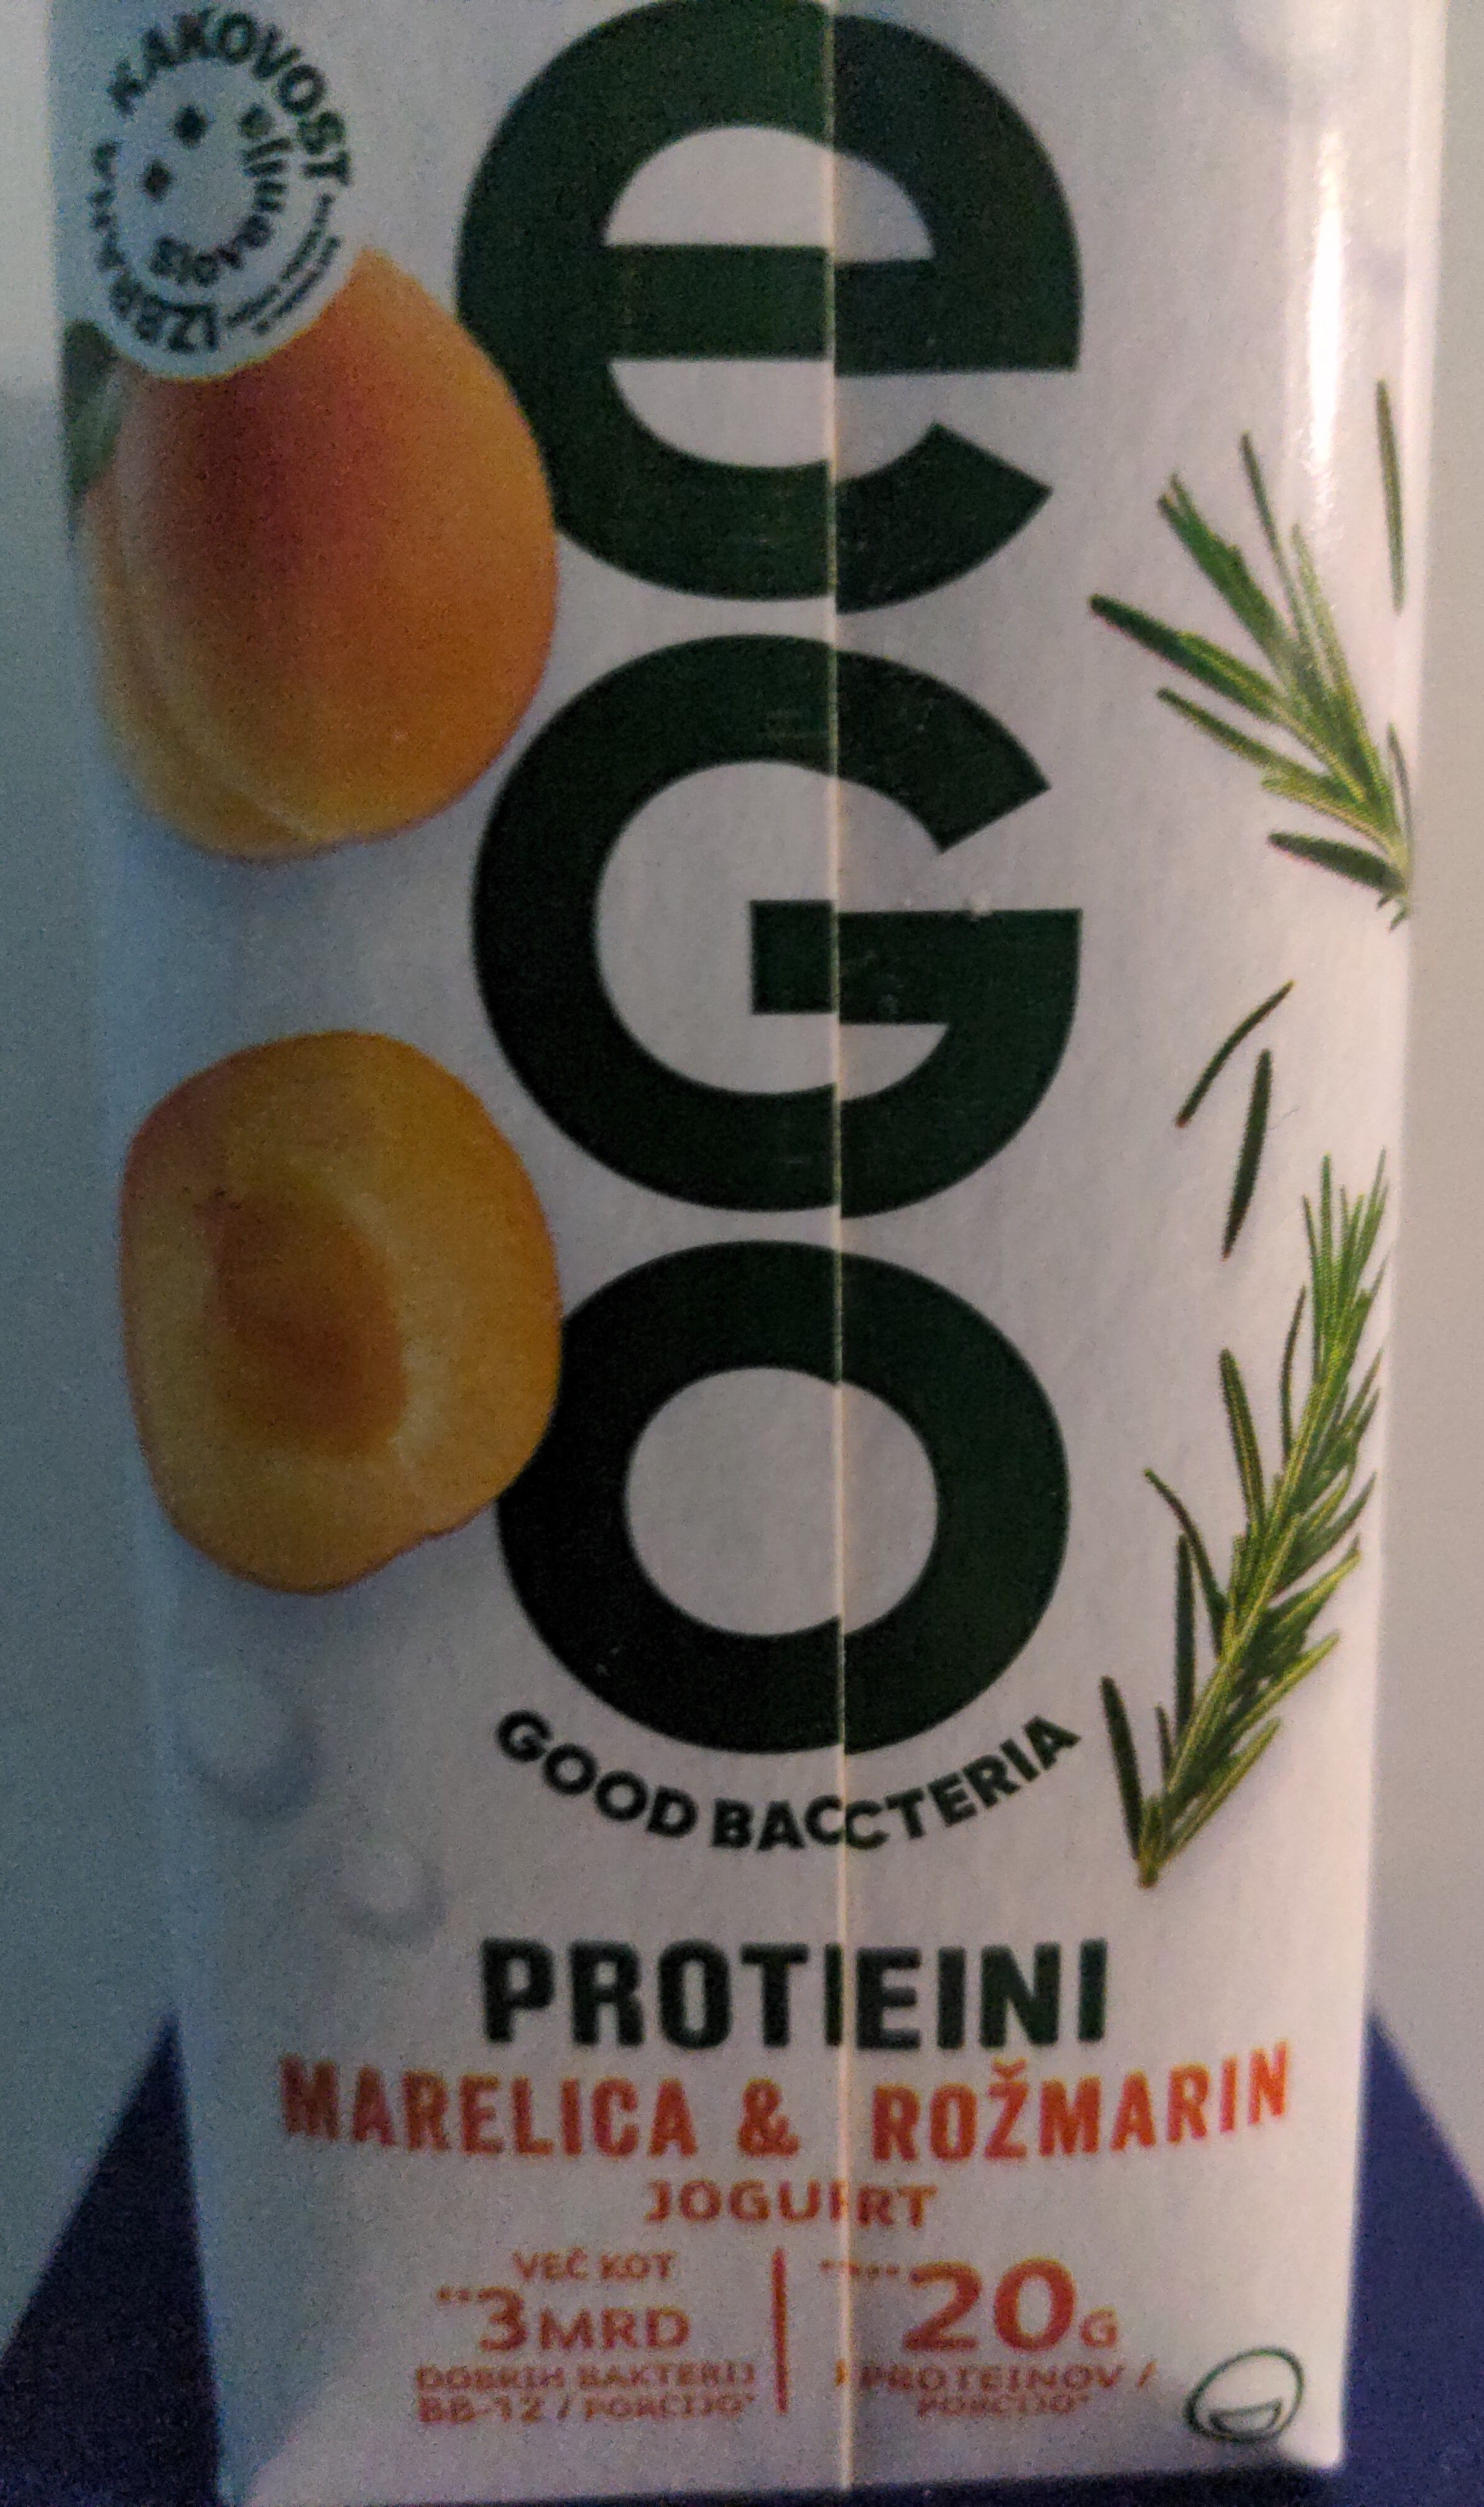 ego proteins apricot & rosemary - Produkt - en